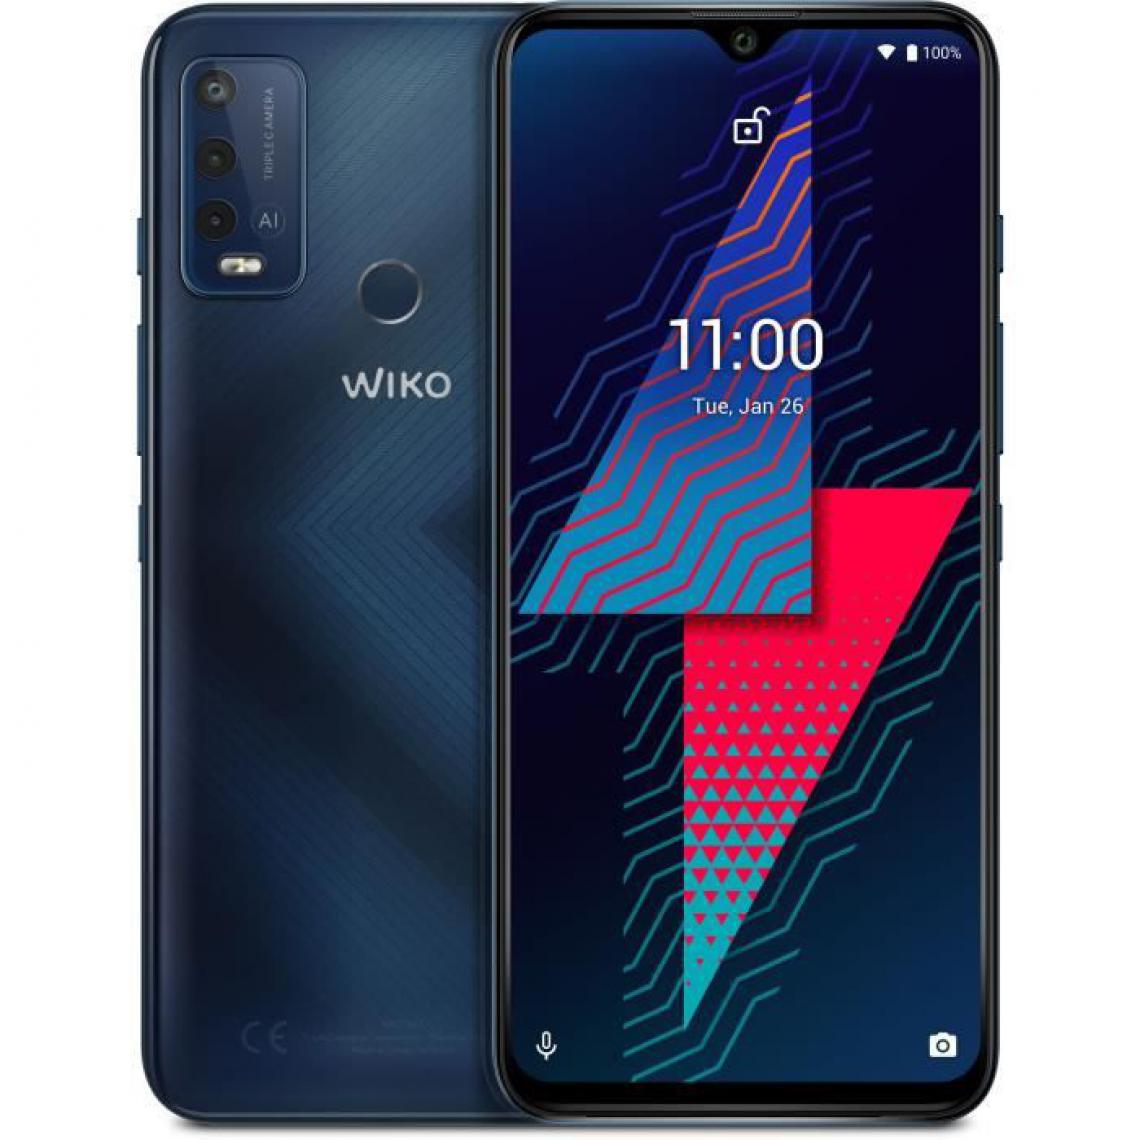 Wiko - Wiko Power U30 Carbone Blue 64Go - Smartphone Android